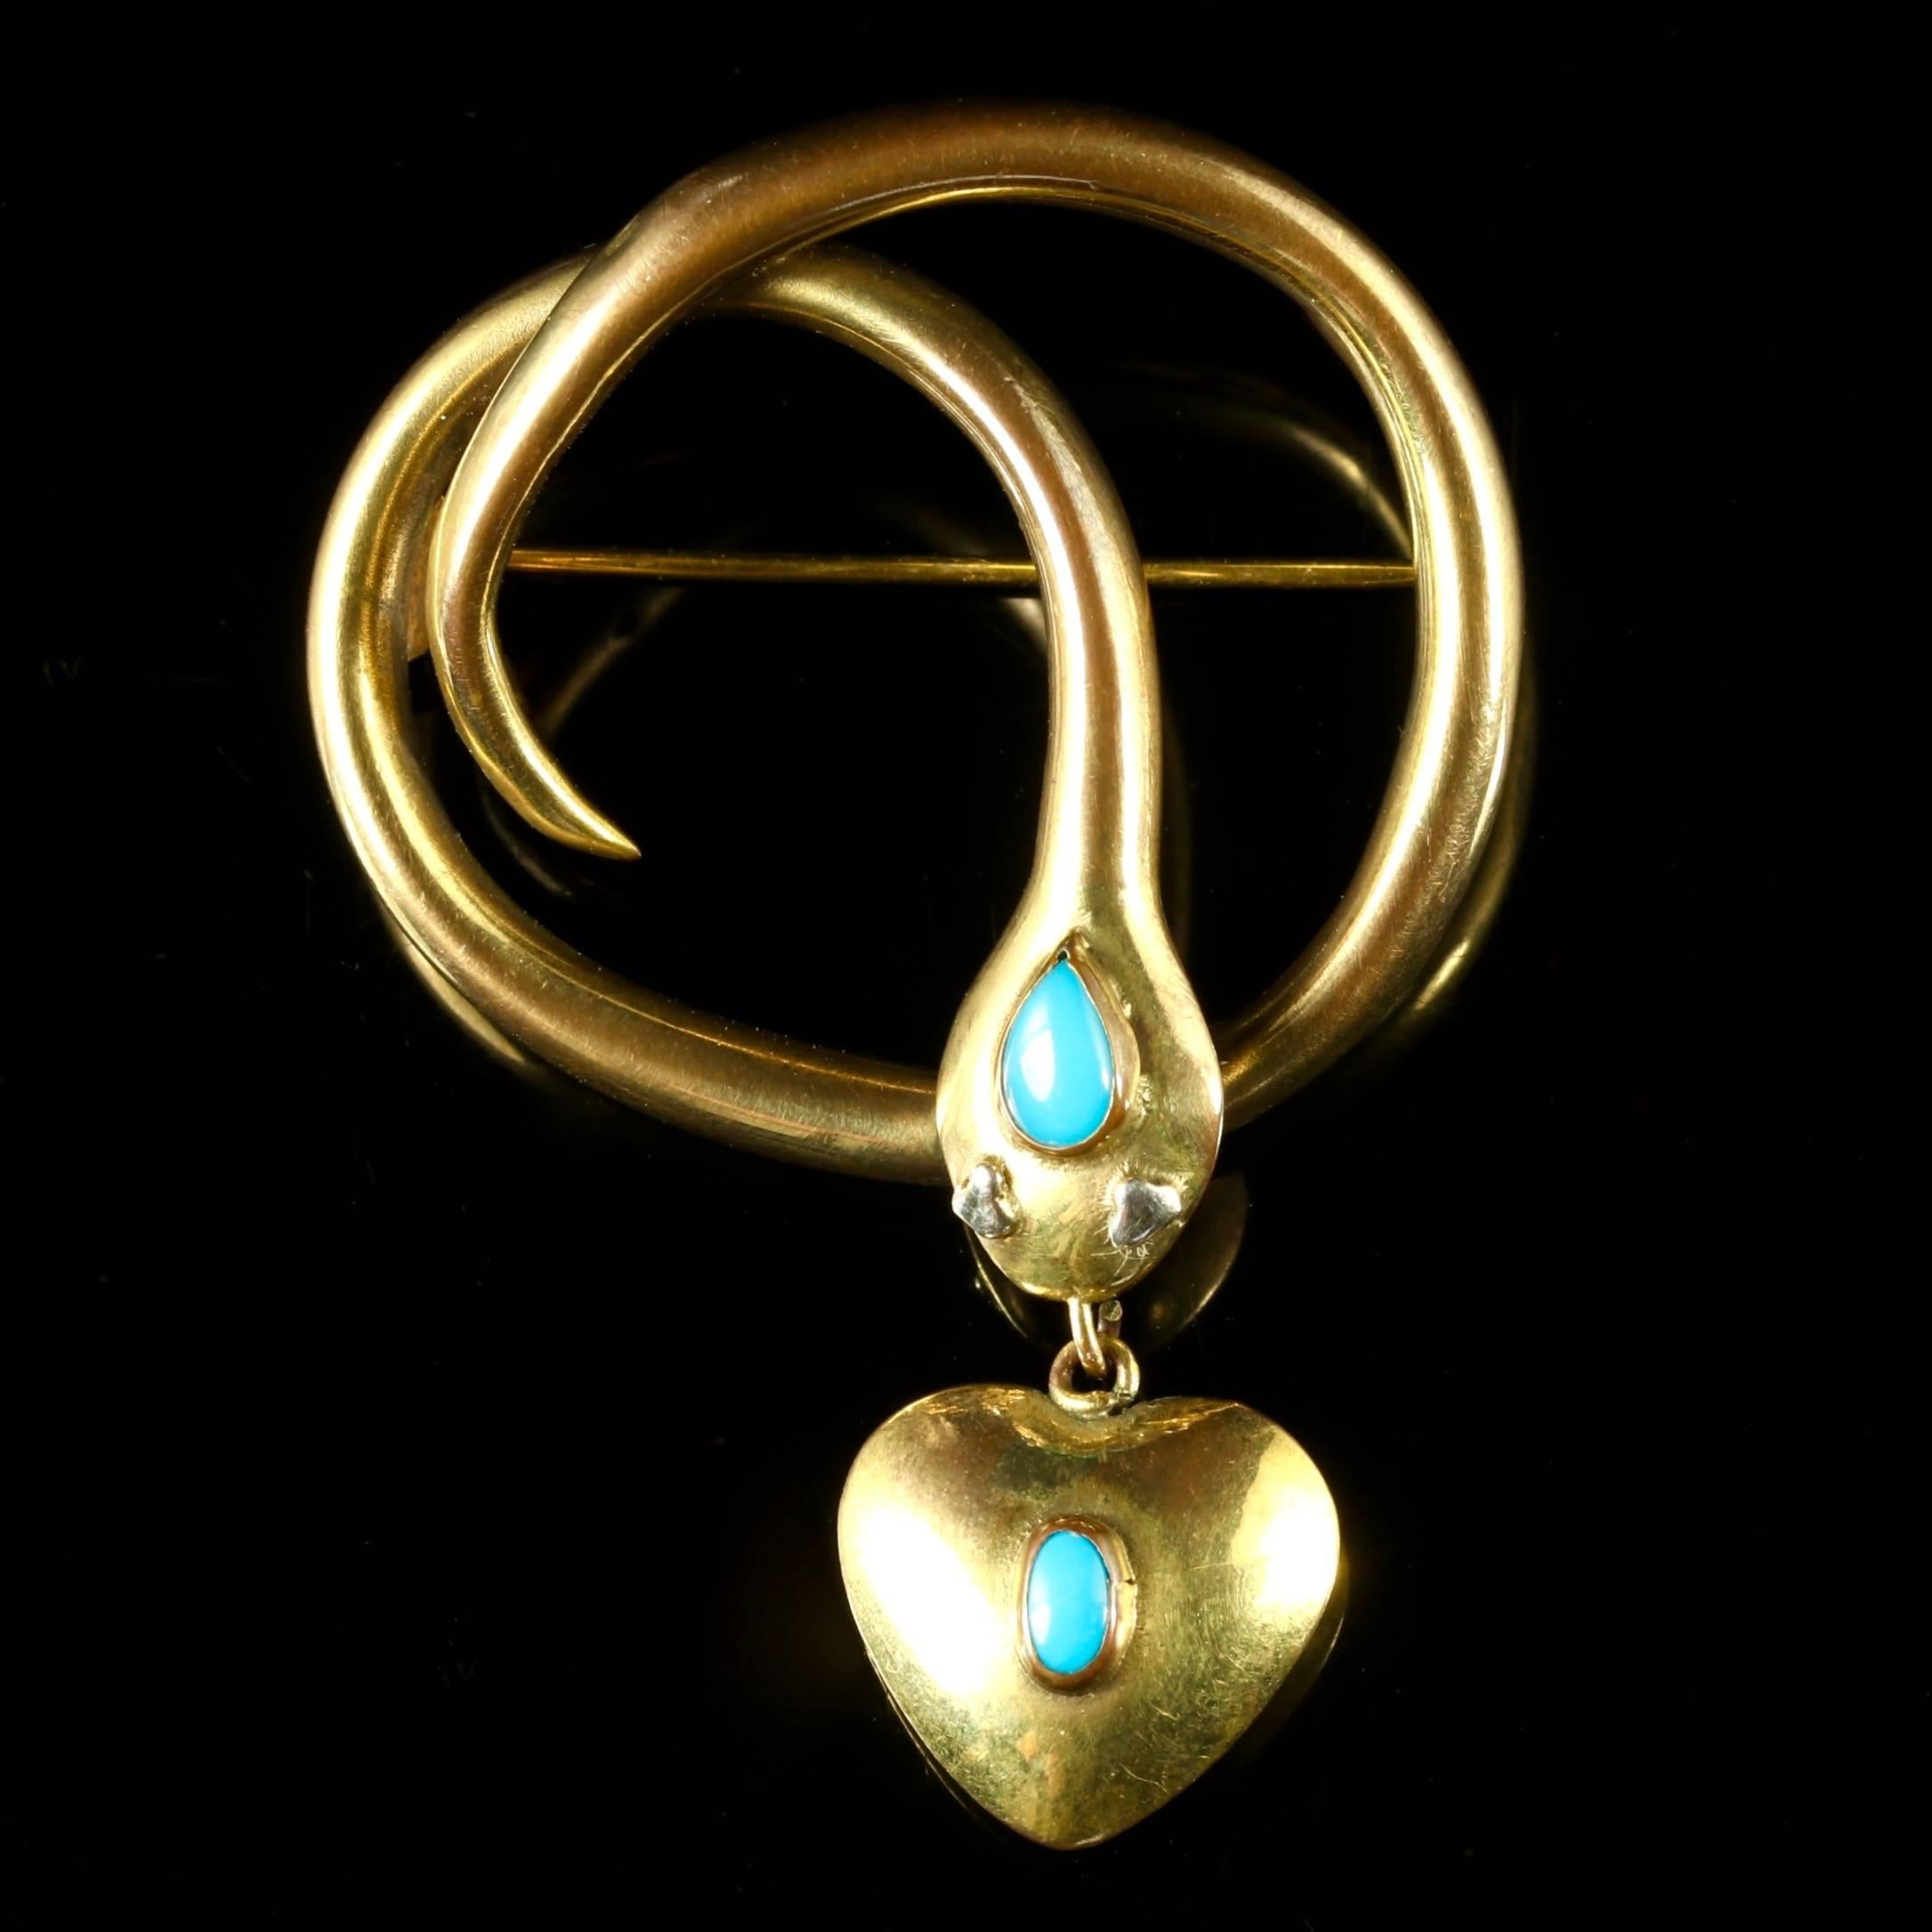 This fabulous antique Victorian 18ct Gold gilded Turquoise snake brooch is Circa 1880.

The wonderful brooch depicts a beautifully gilded snake which is adorned with a Turquoise gemstone which is crowned upon his head and on the heart